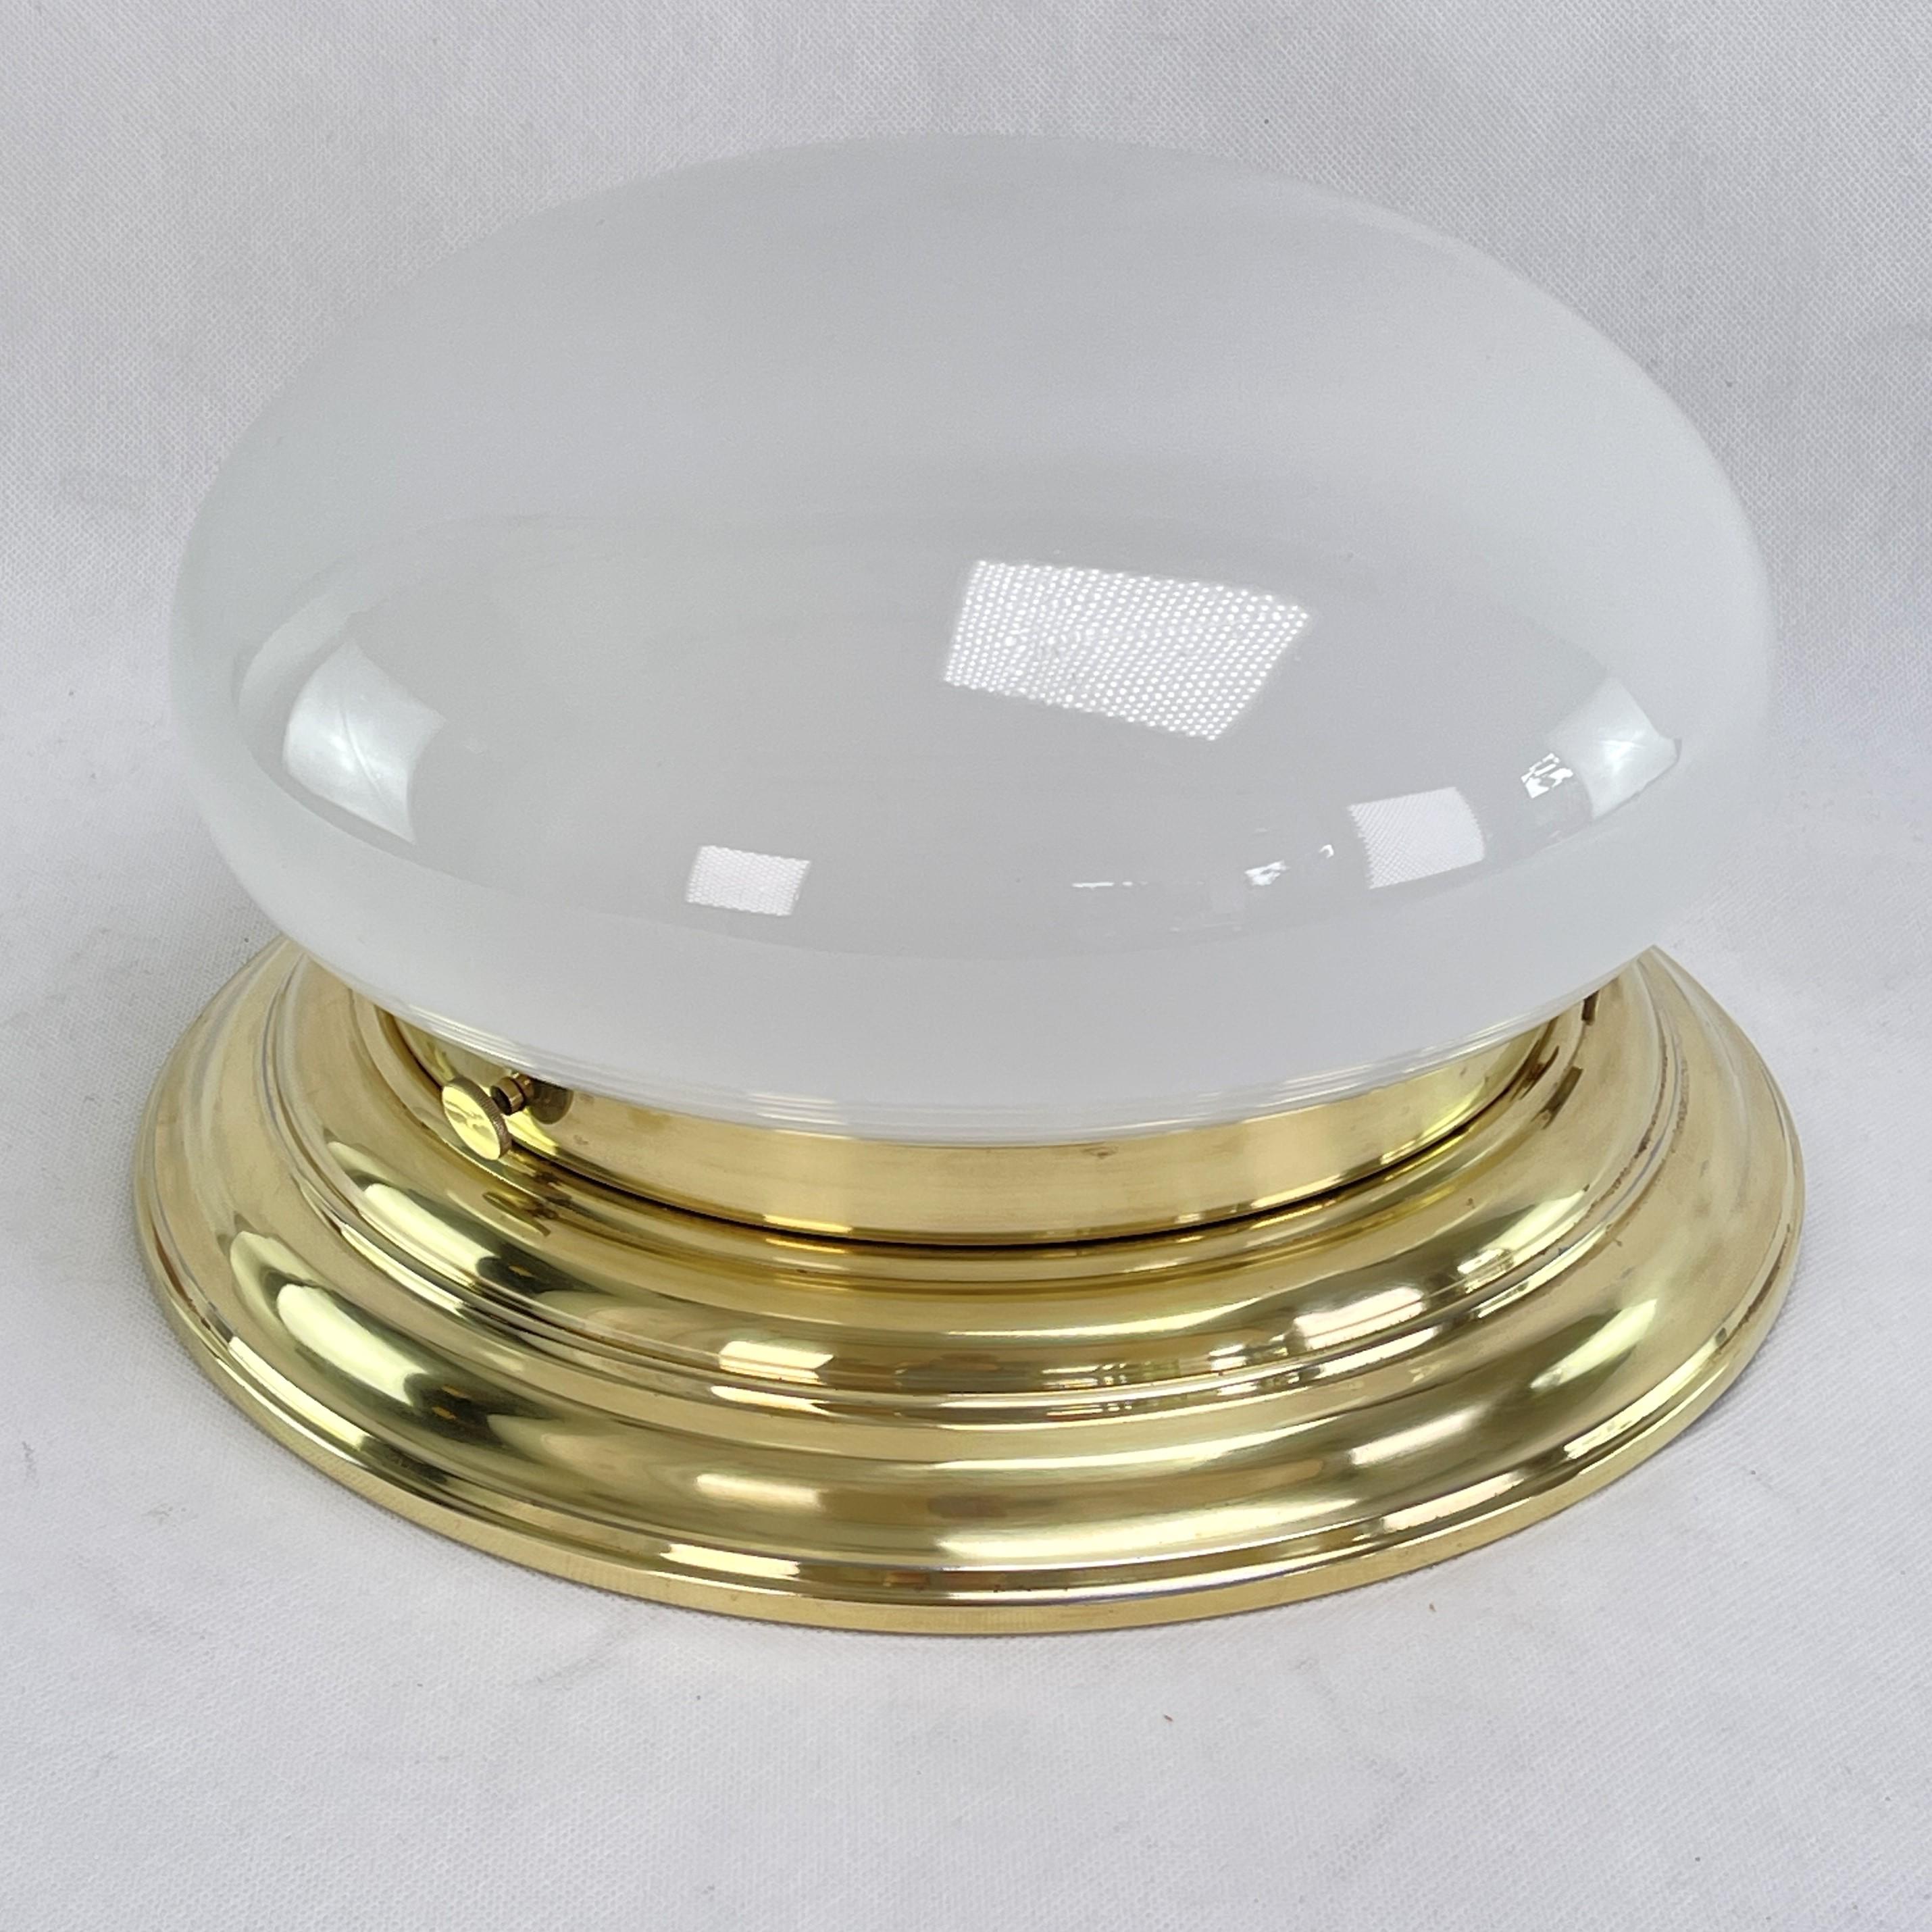 Mid-20th Century 1 of 2 Art Deco Flush Mount Brass Plafoniere Ceiling Lamp, Lamp, circa 1930 For Sale